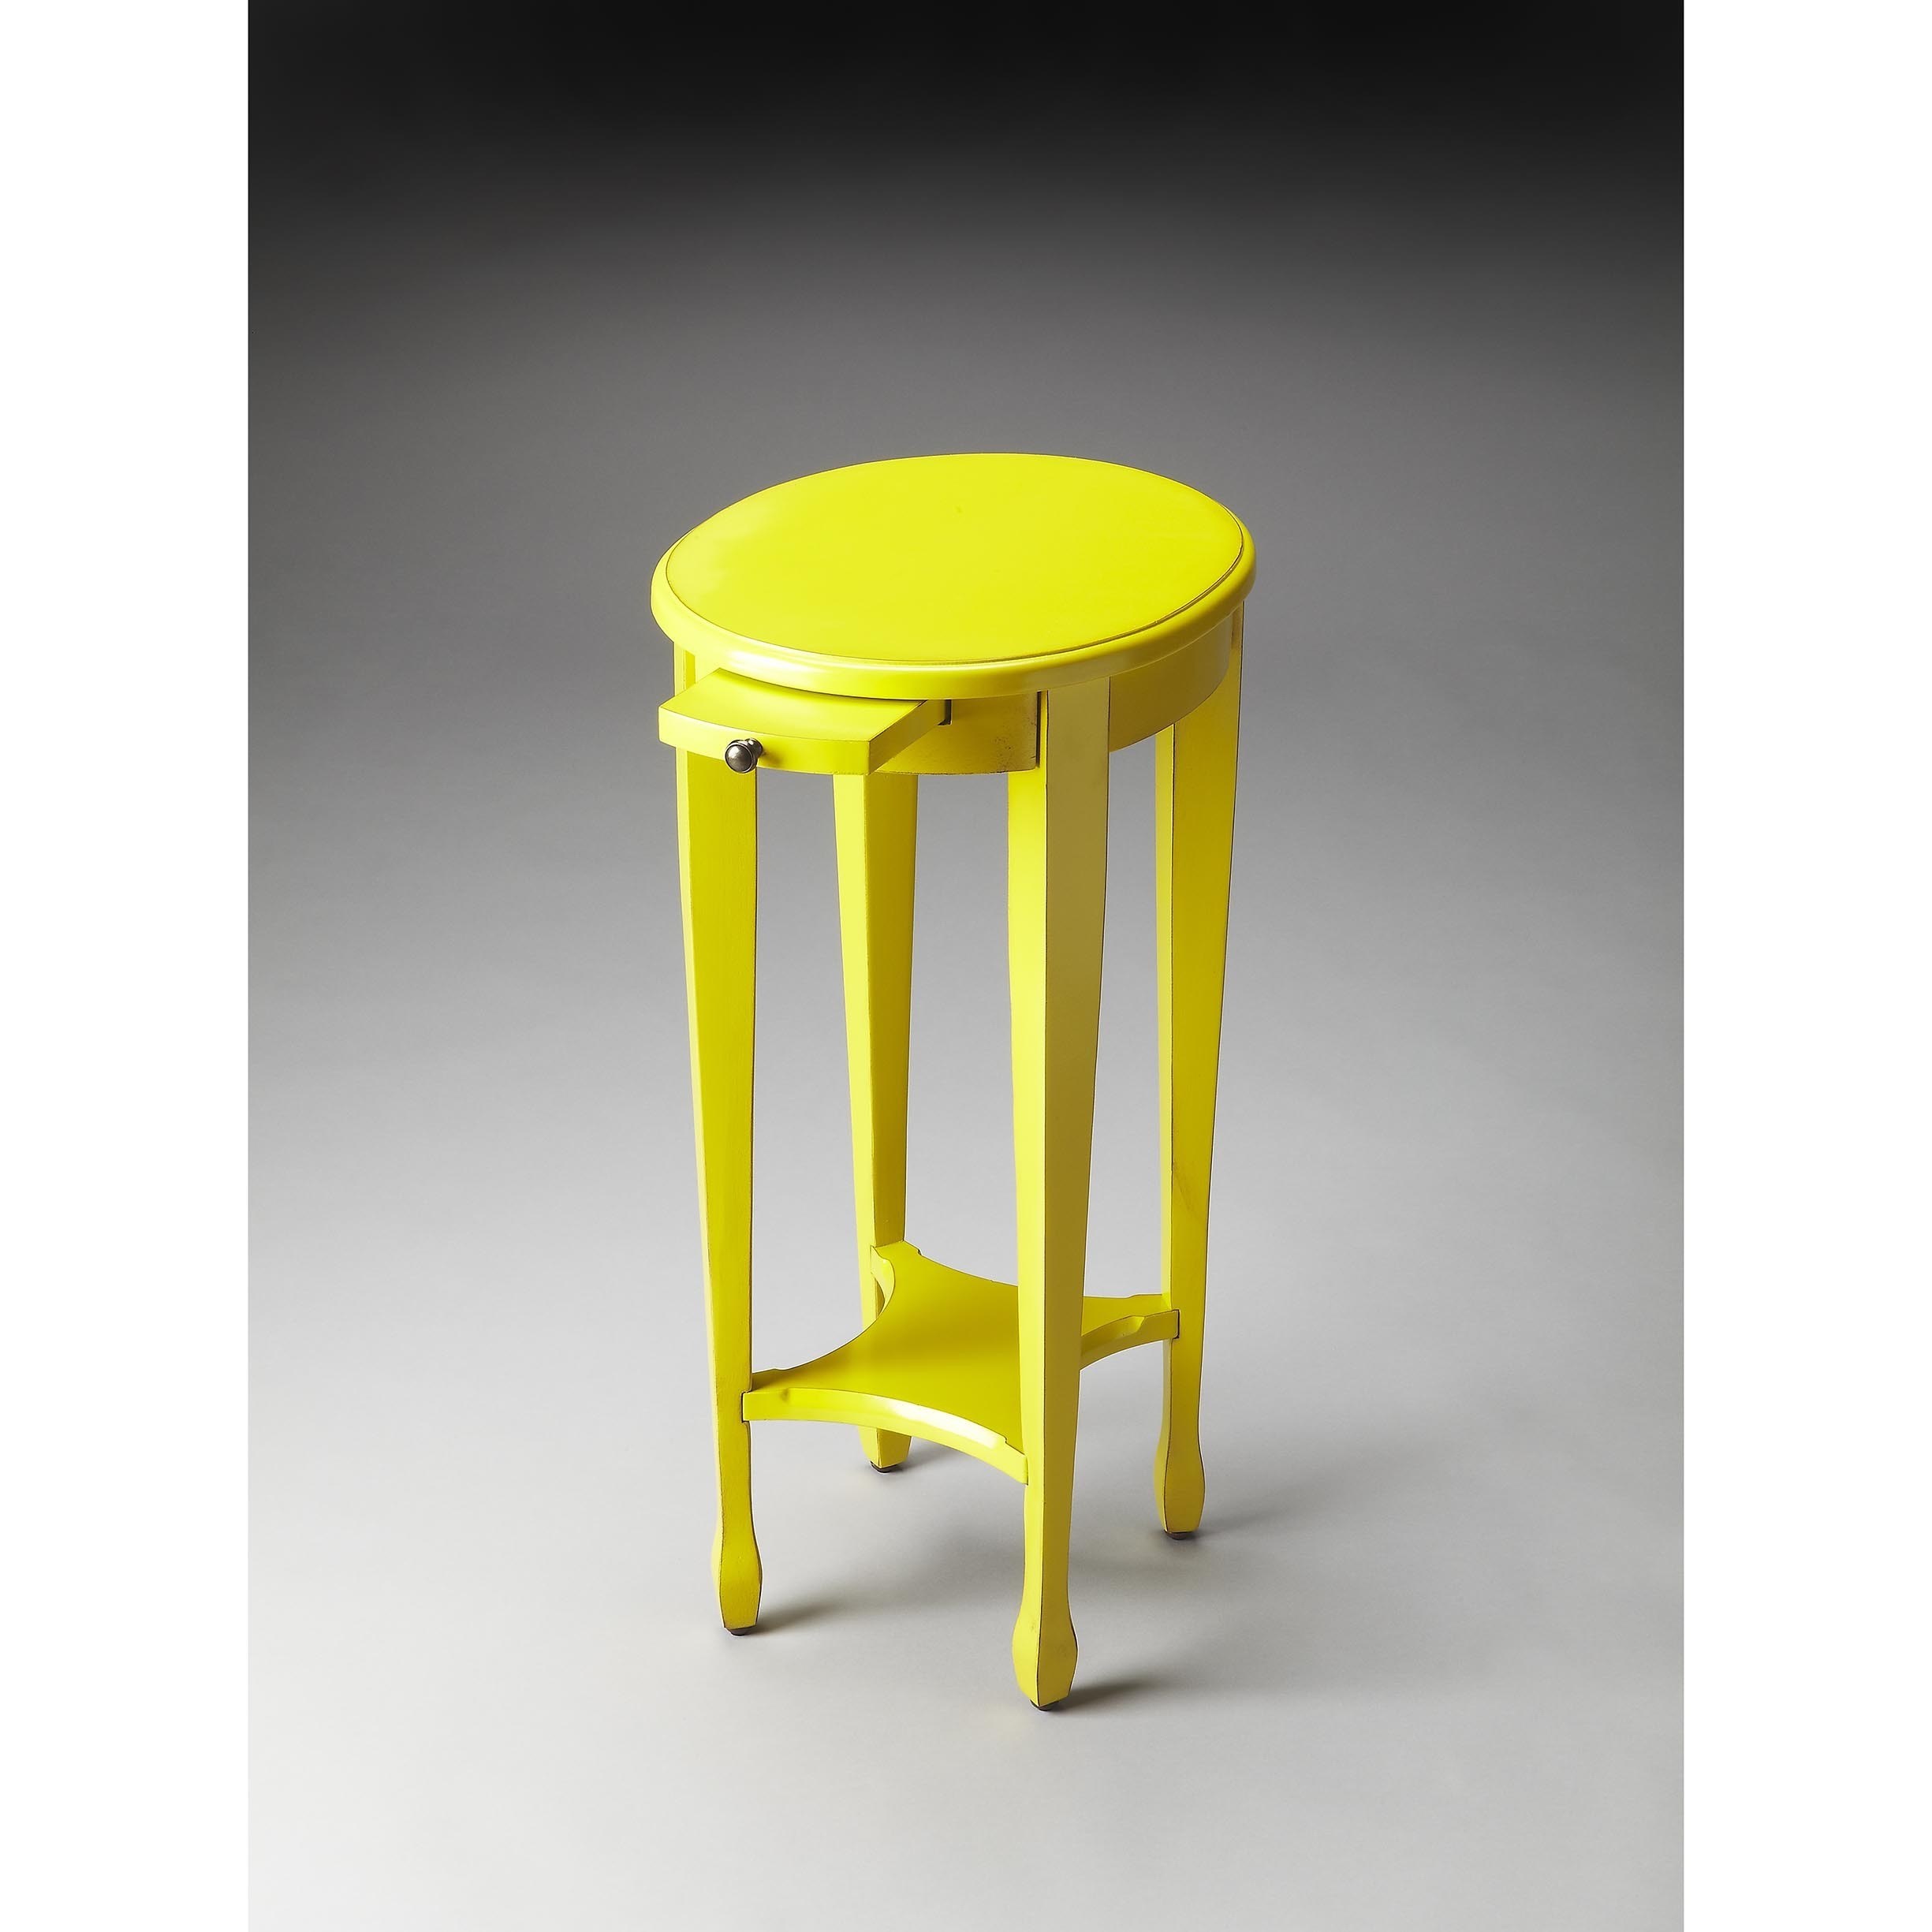 handmade butler arielle yellow round end table accent free shipping today diy base for glass top target bar antique side with shelf small metal and tables lucite console